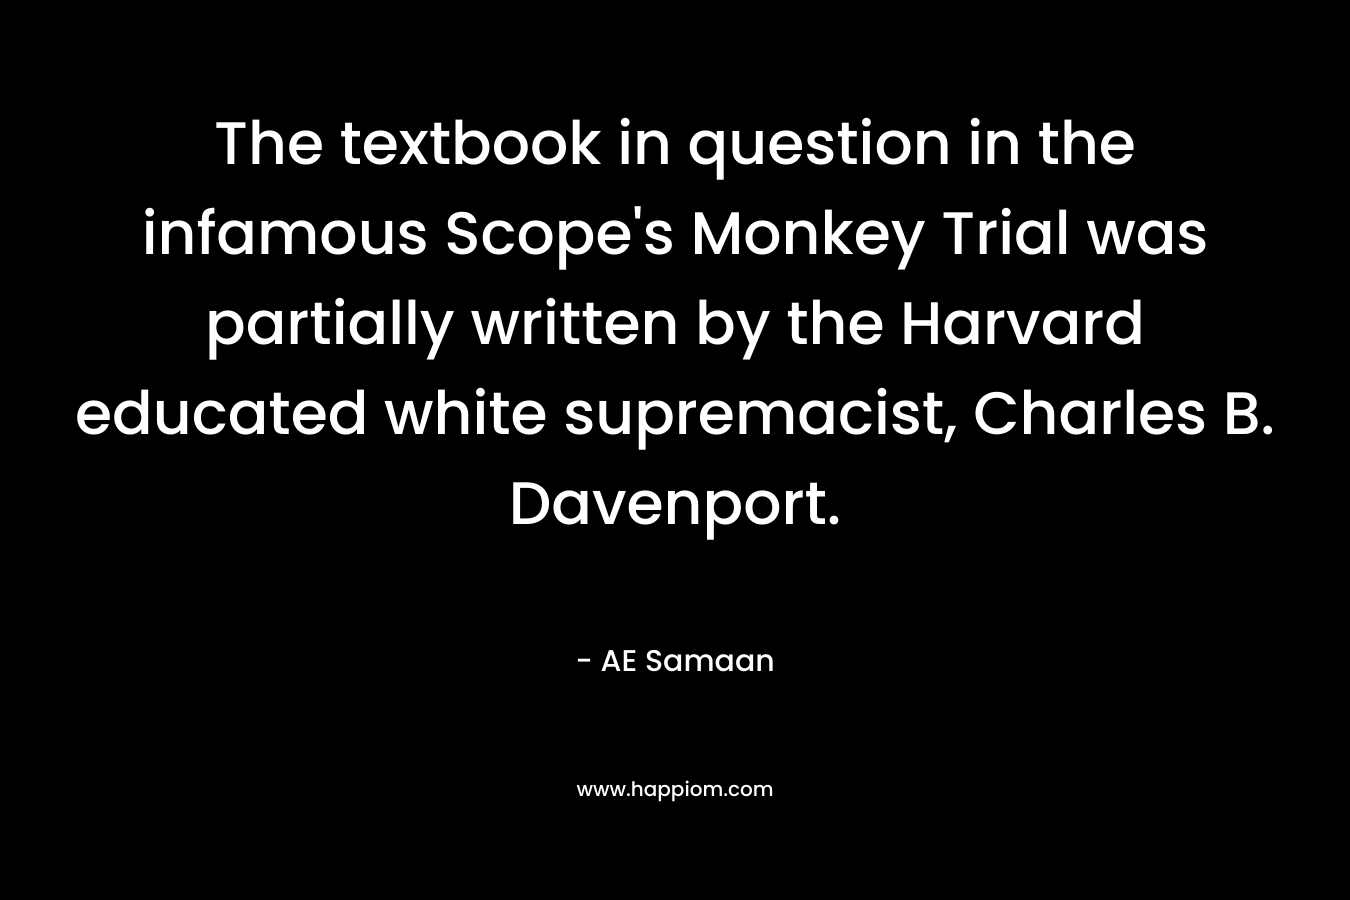 The textbook in question in the infamous Scope's Monkey Trial was partially written by the Harvard educated white supremacist, Charles B. Davenport.